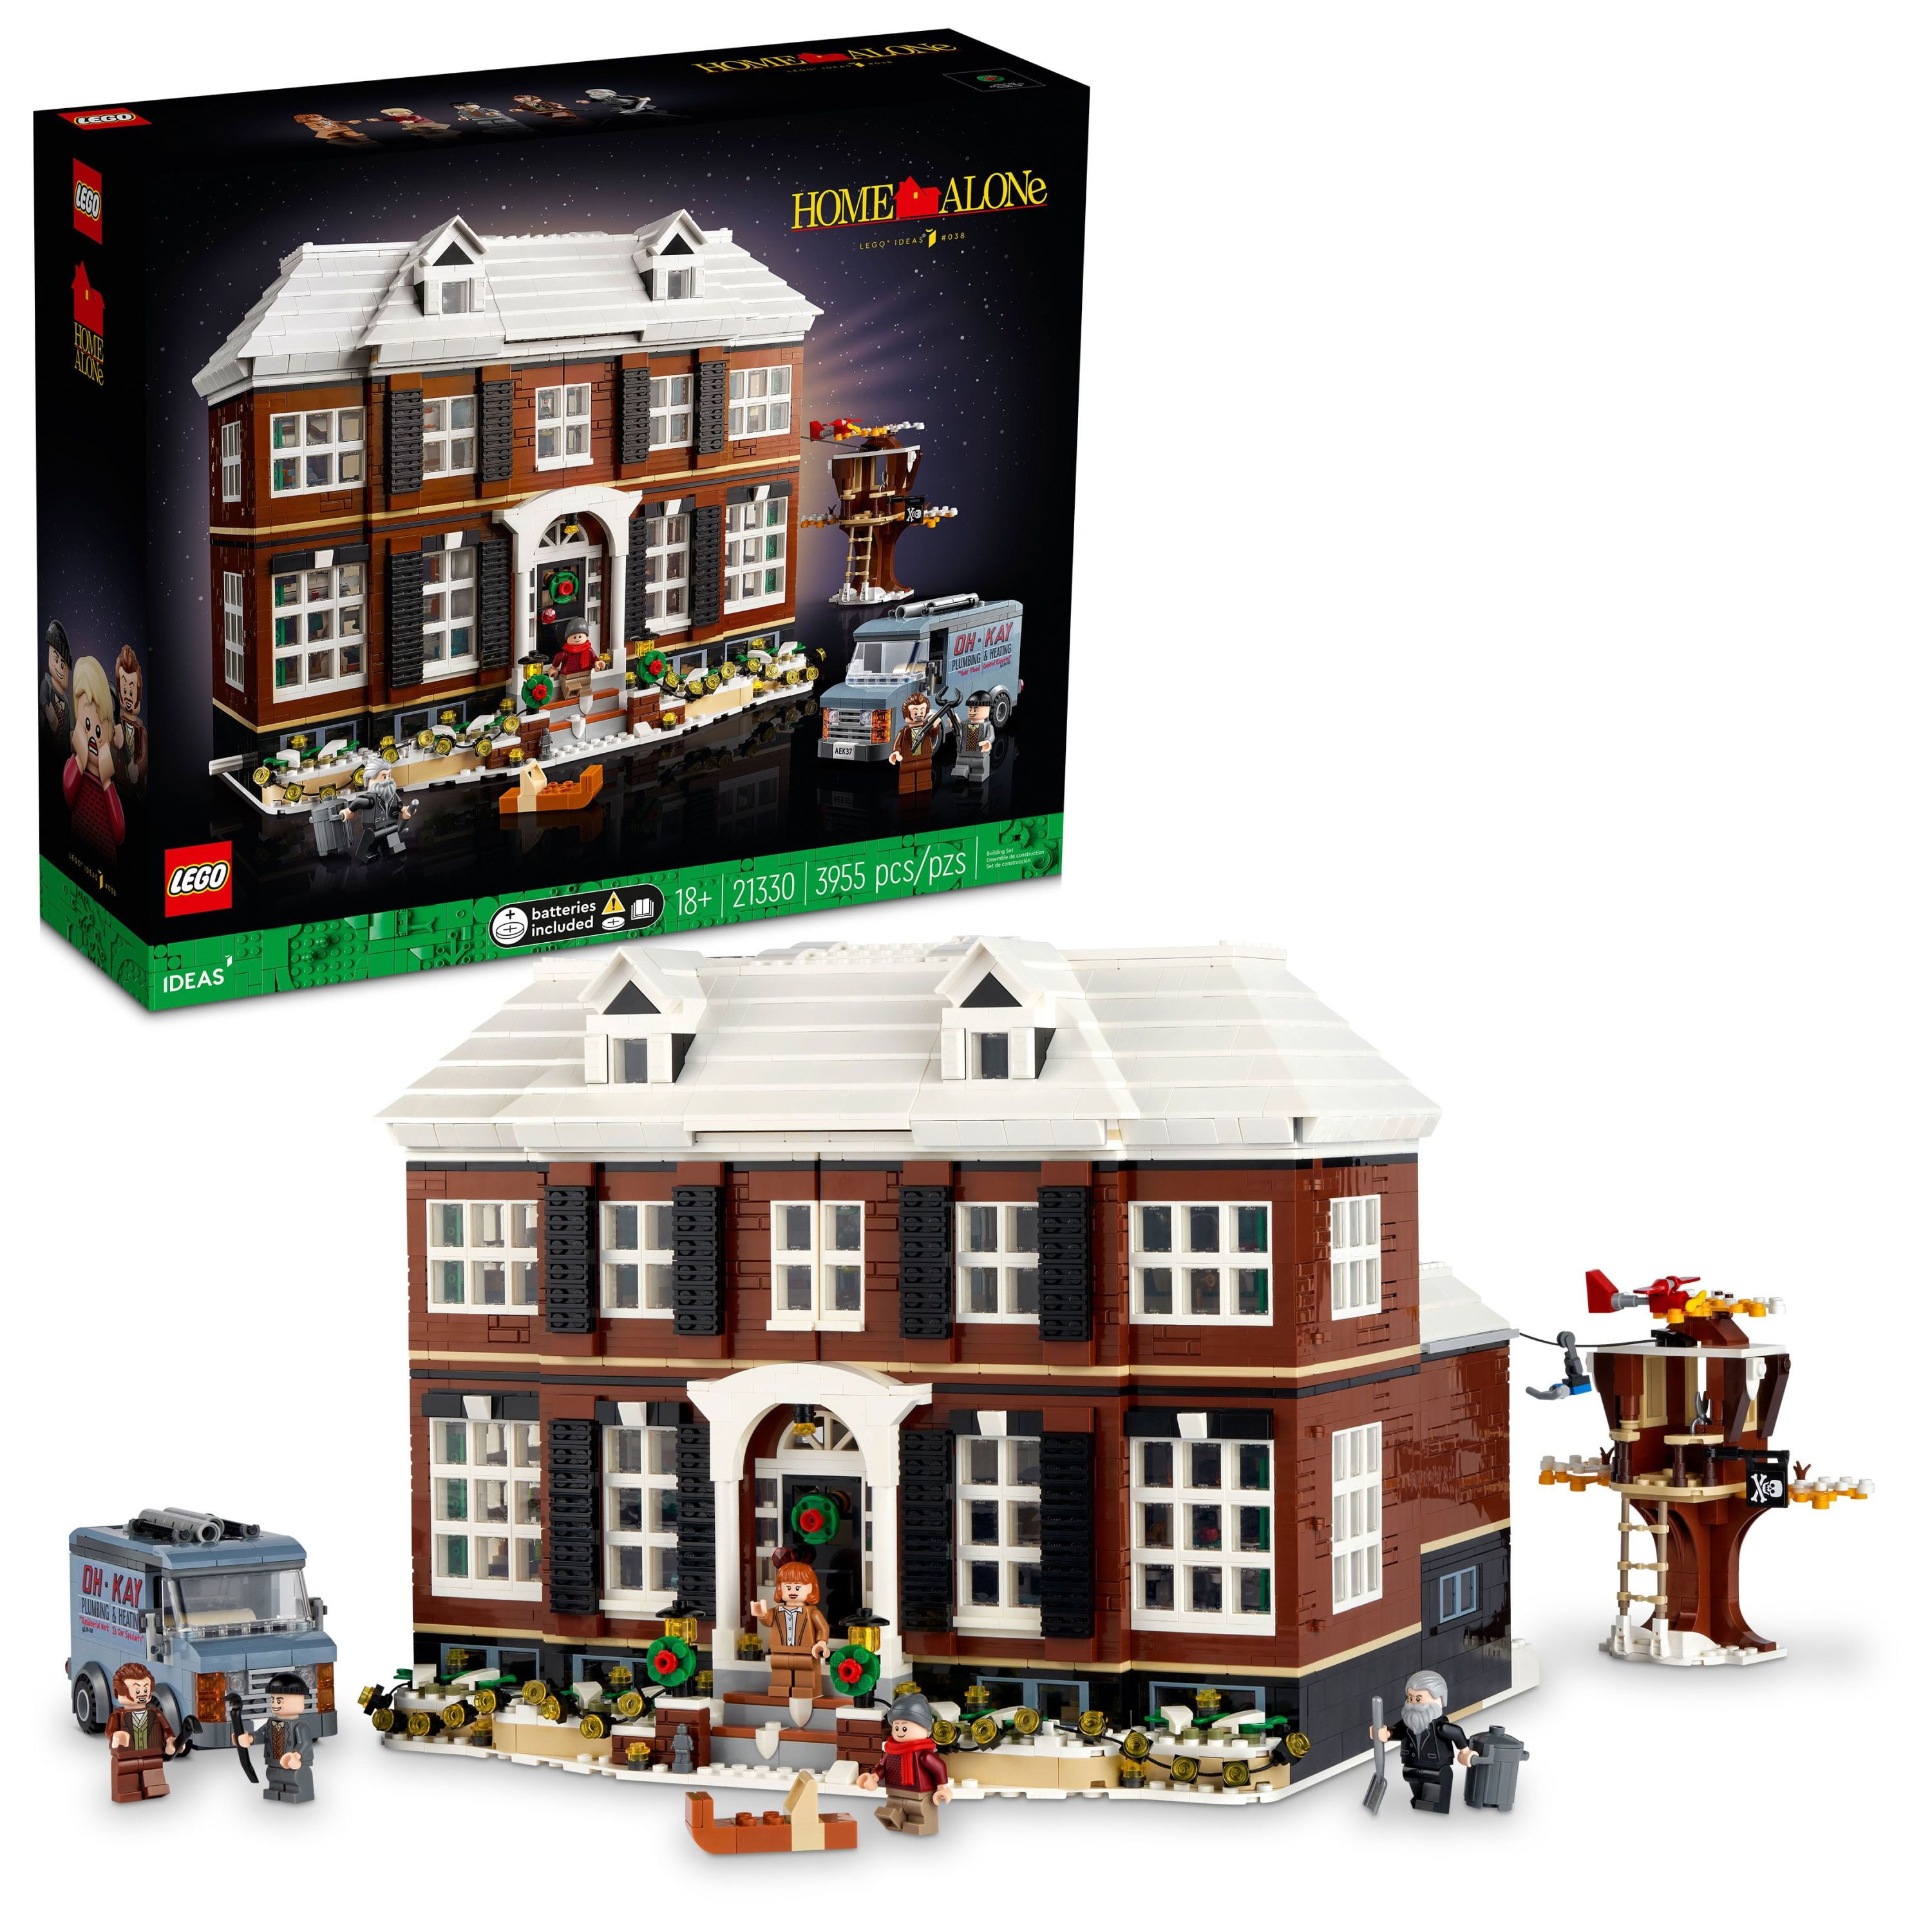 LEGO Ideas Home Alone McCallisters' 21330 Building for Adults, Movie Collectible Gift Idea with Minifigures Walmart.com